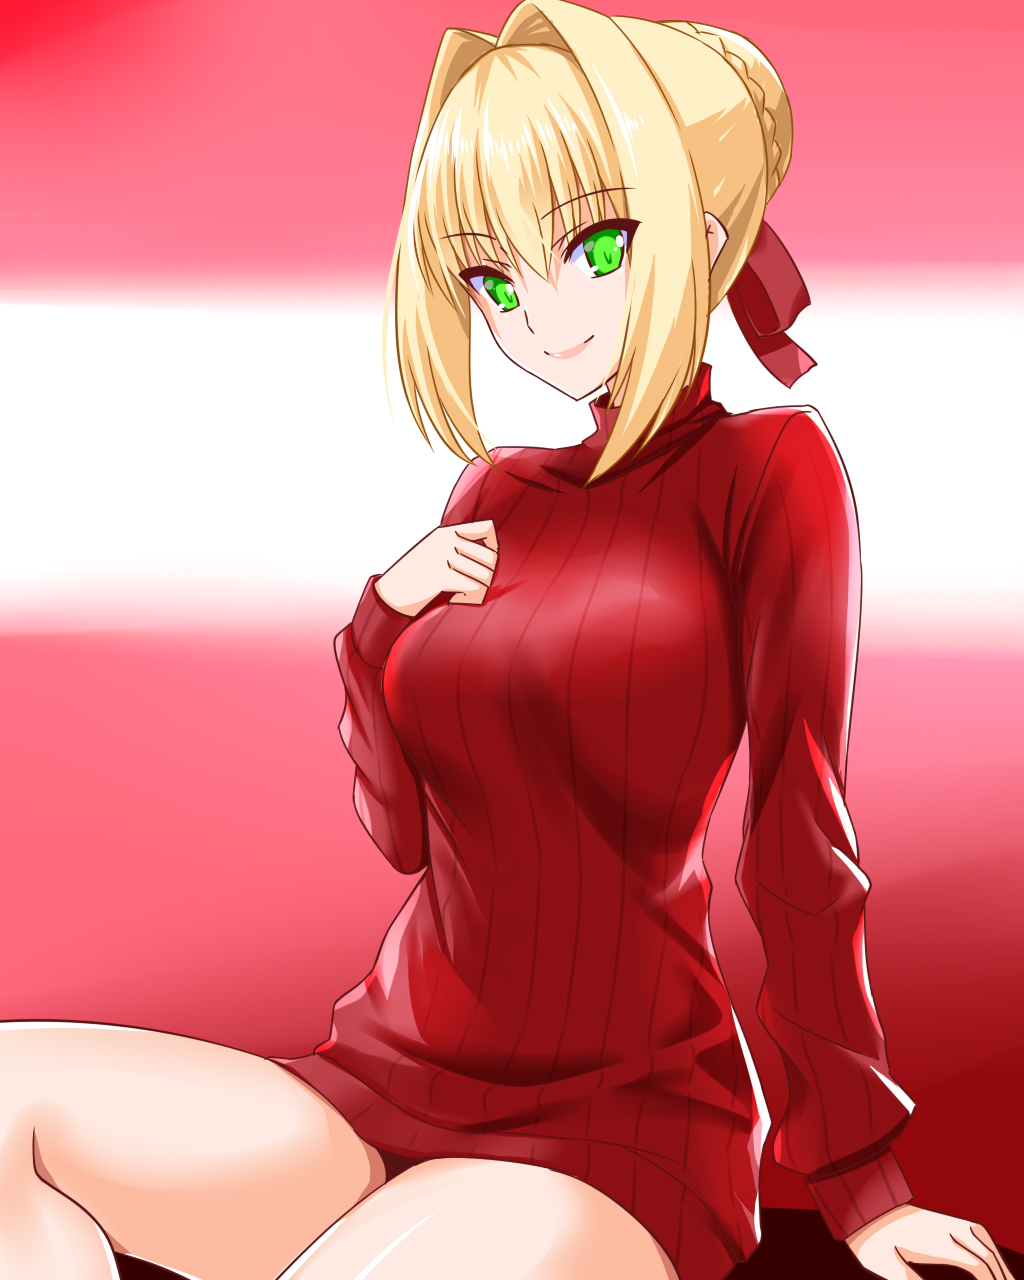 Anime 1024x1280 anime anime girls Fate series Fate/Extra Fate/Extra CCC Nero Claudius hairbun blonde solo artwork digital art fan art sweater portrait display smiling looking at viewer simple background minimalism